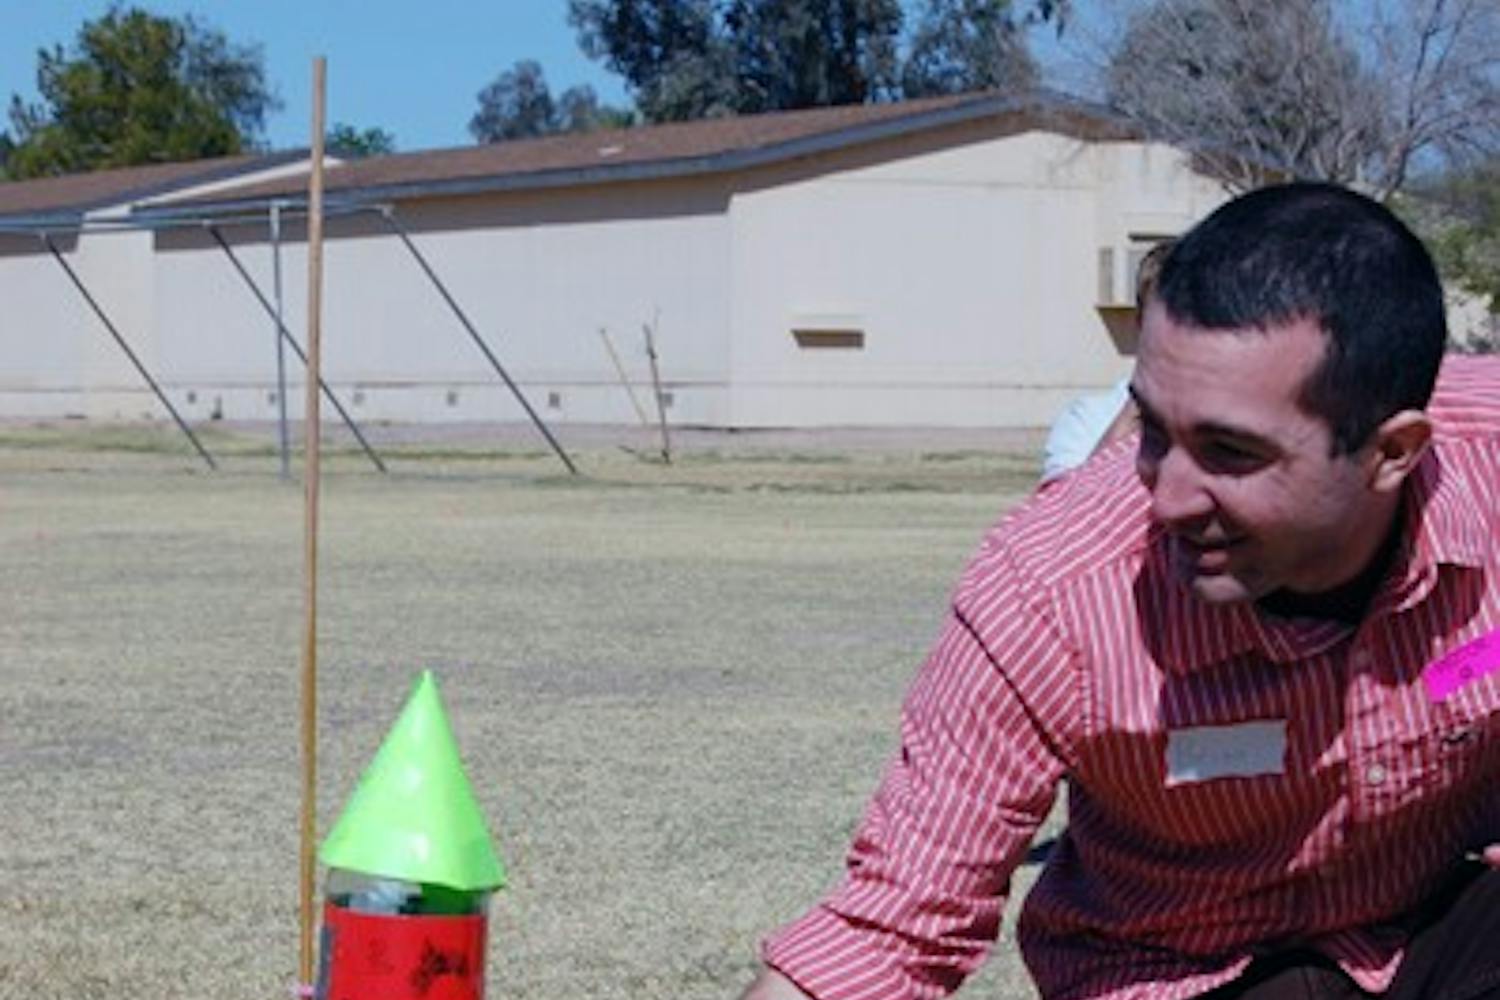 Sanborn Elementary School students cheered as Arizona Science Outreach volunteer and ASU engineering graduate Brian Proulx placed the soda bottle rocket on the launch pad in hopes their rocket would win first place. (Photo by Thania A. Betancourt)